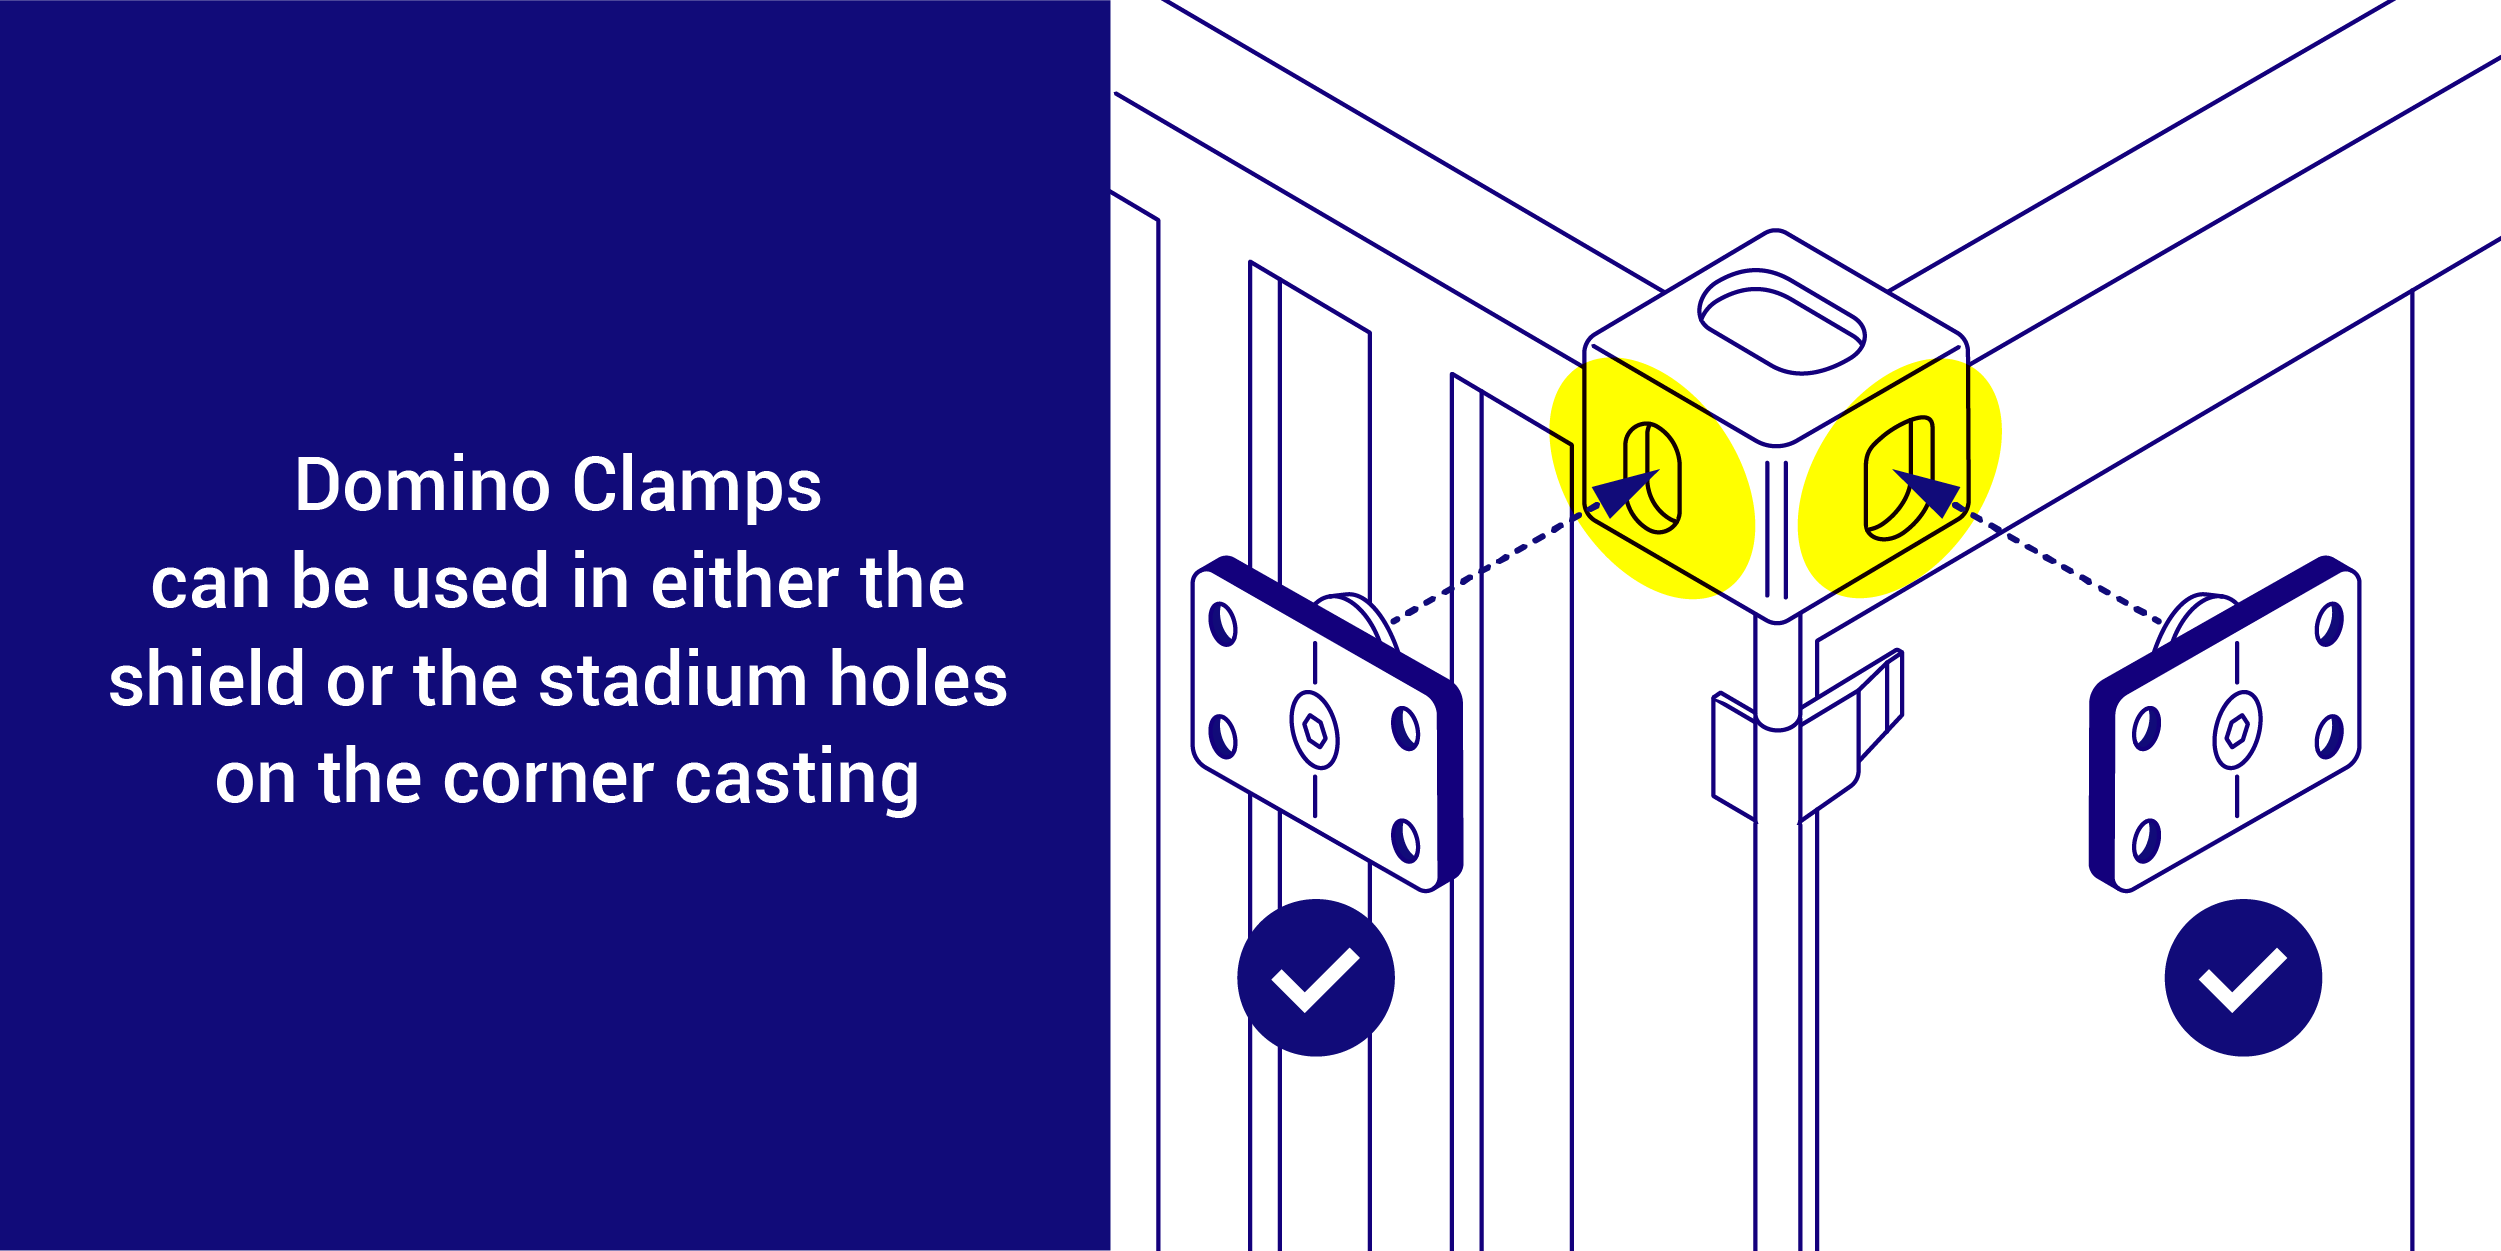 Domino Clamps can be used in either the shield or stadium hole of the corner casting